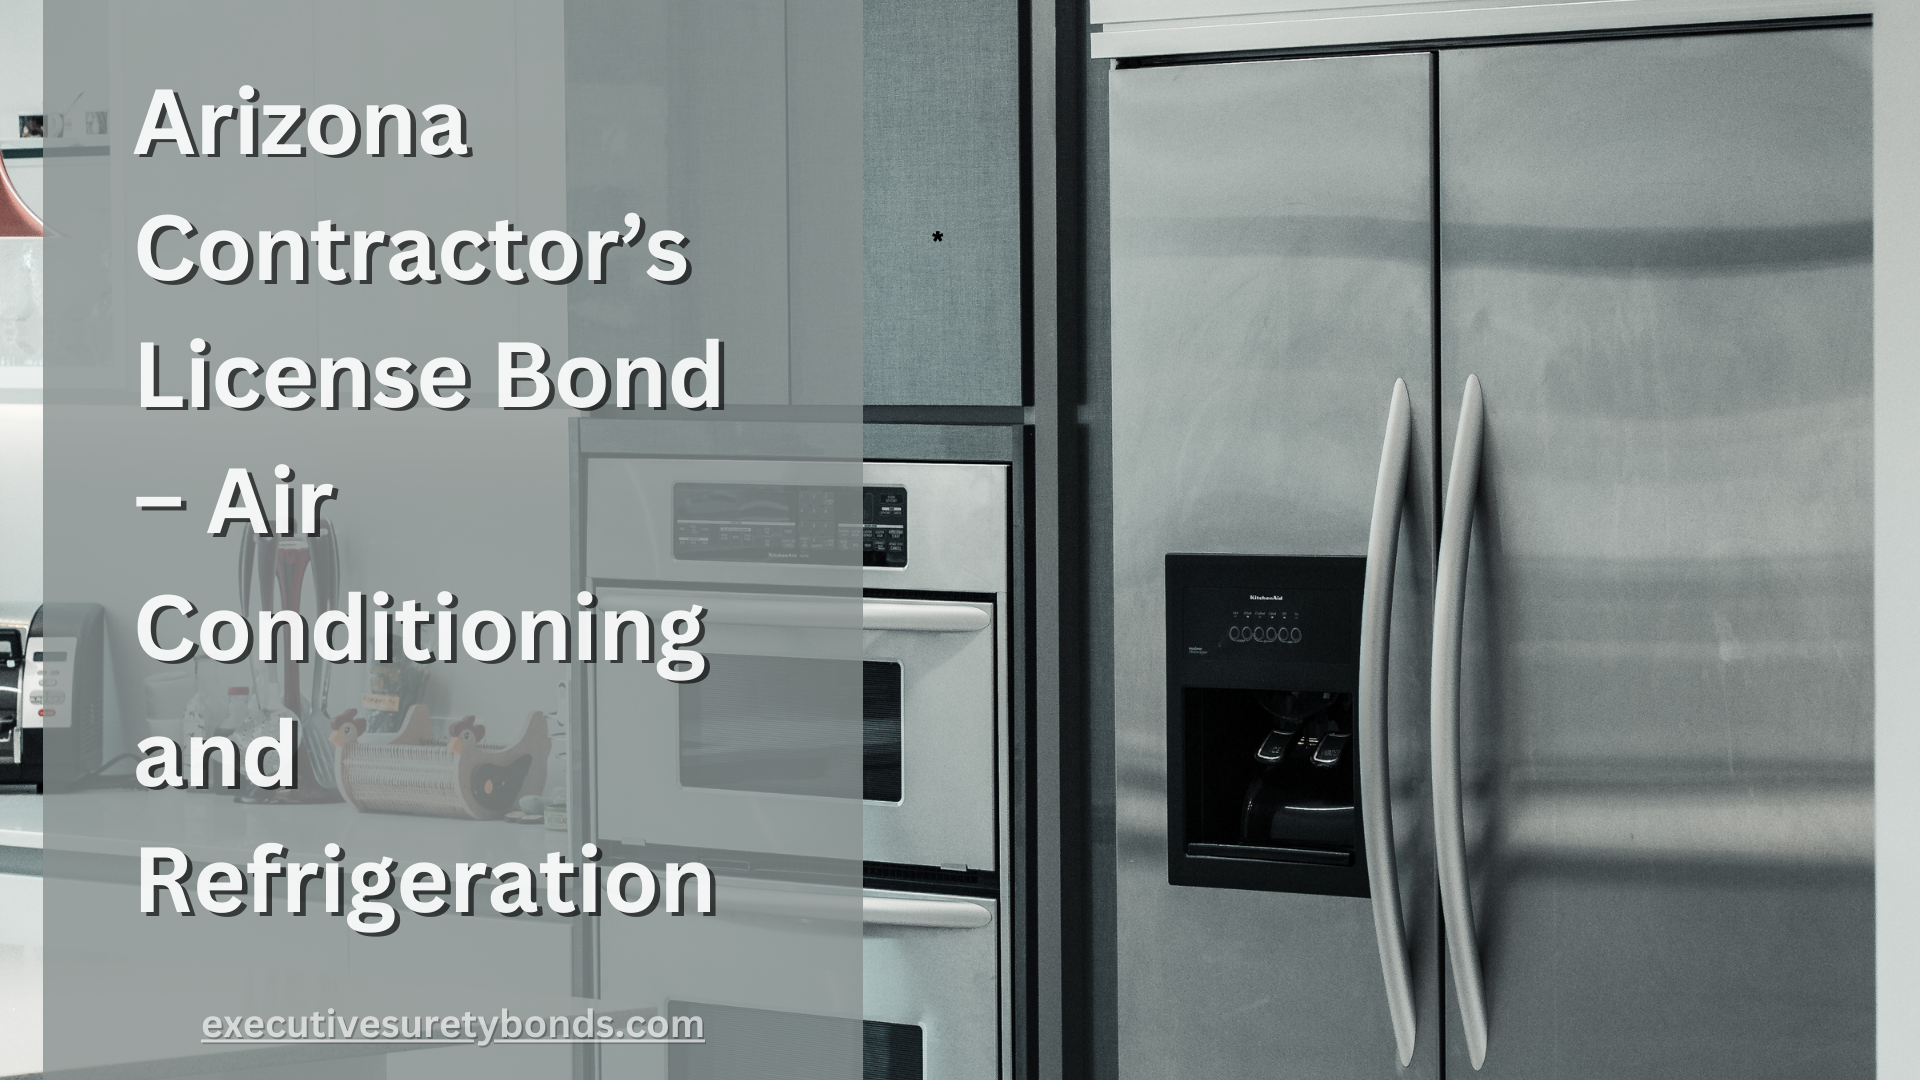 Arizona Contractor’s License Bond – Air Conditioning and Refrigeration